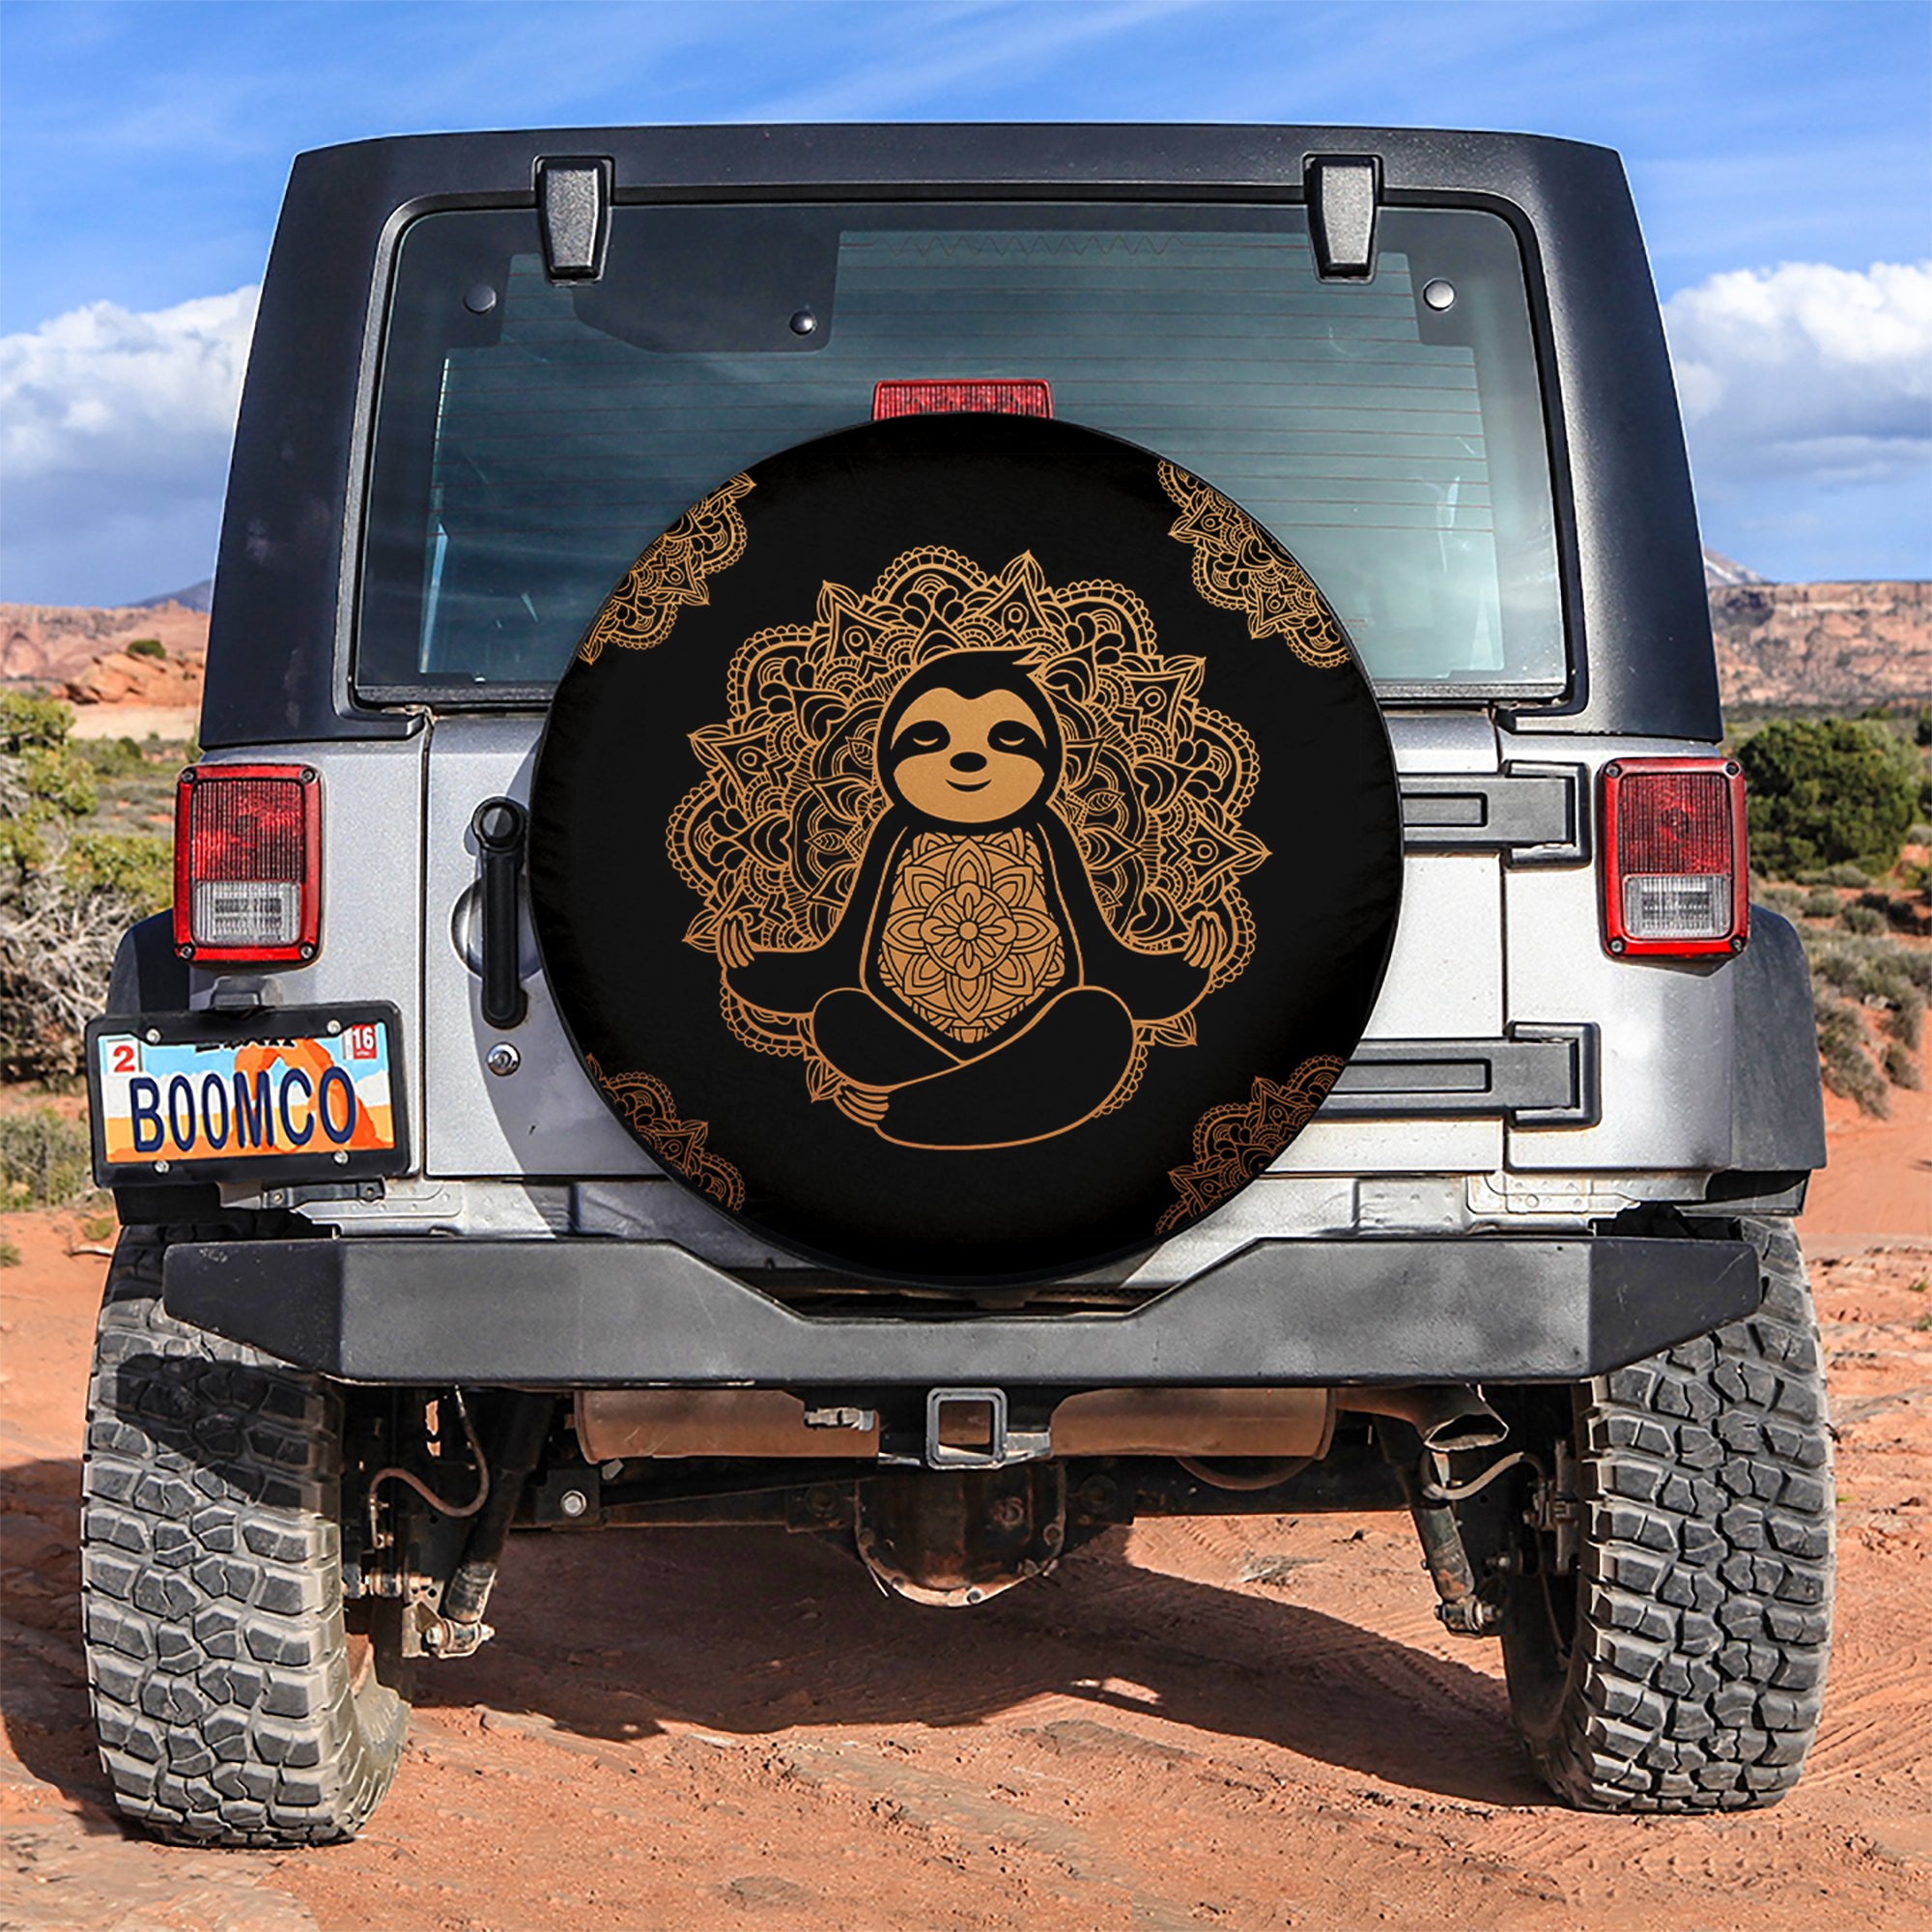 Sloth Mandala Yoda Car Spare Tire Covers Gift For Campers Nearkii